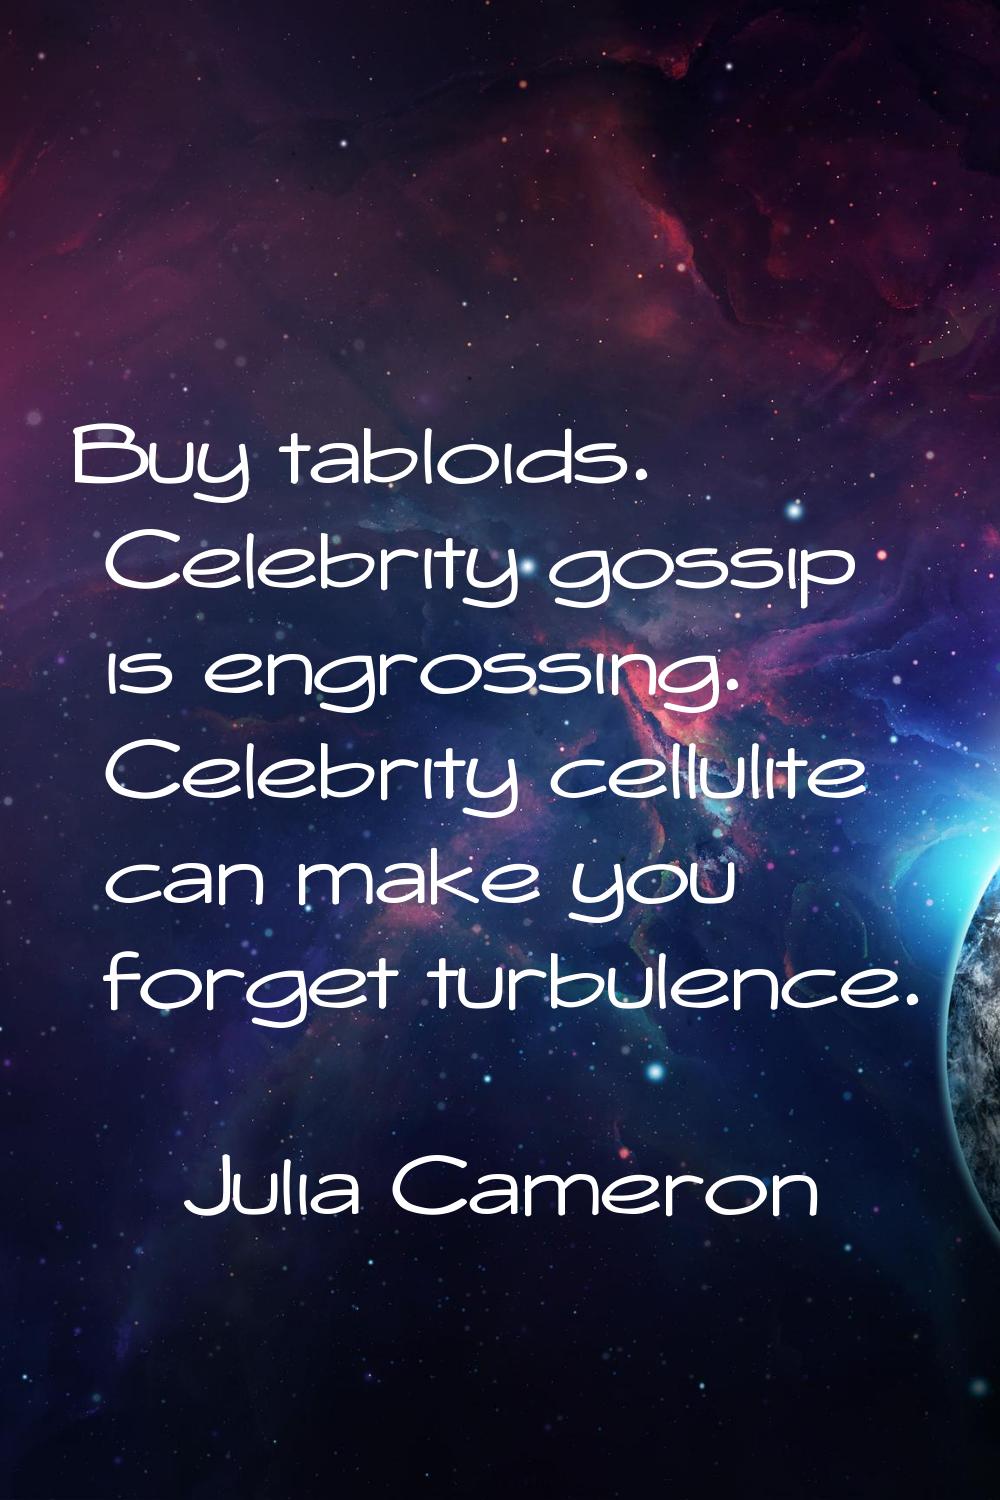 Buy tabloids. Celebrity gossip is engrossing. Celebrity cellulite can make you forget turbulence.